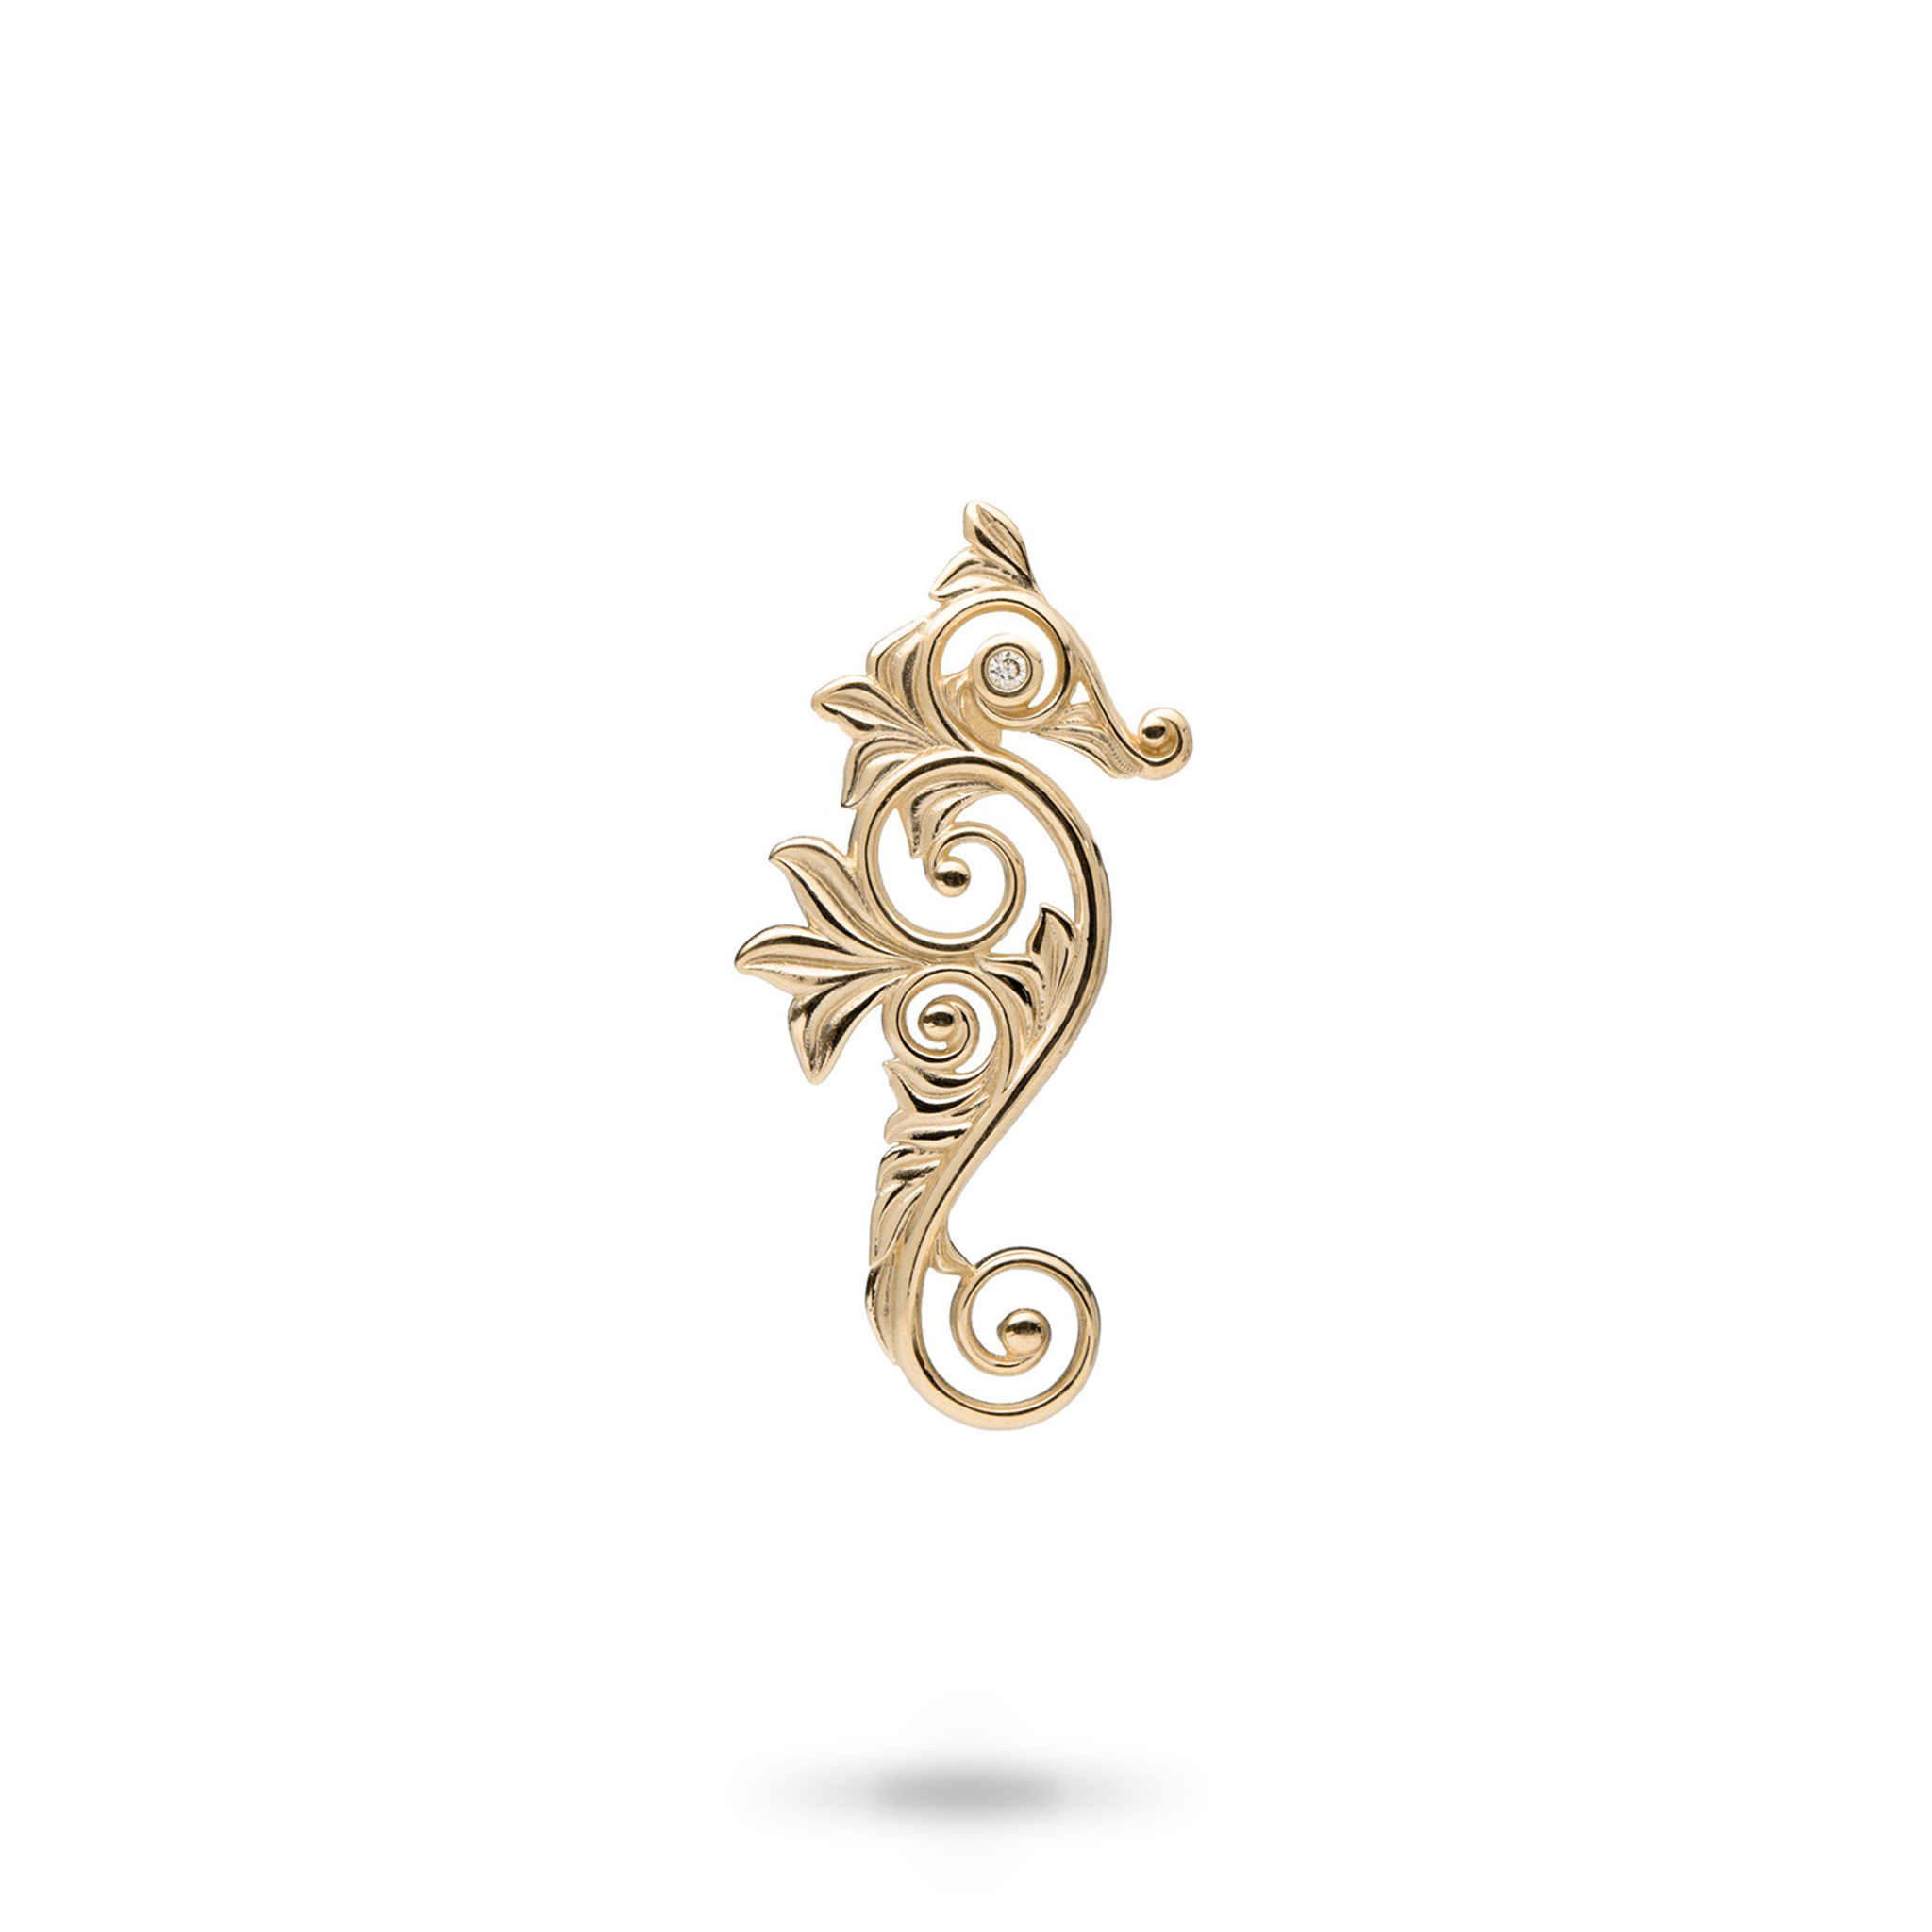 Living Heirloom Seahorse Pendant in Gold with Diamonds - 25mm